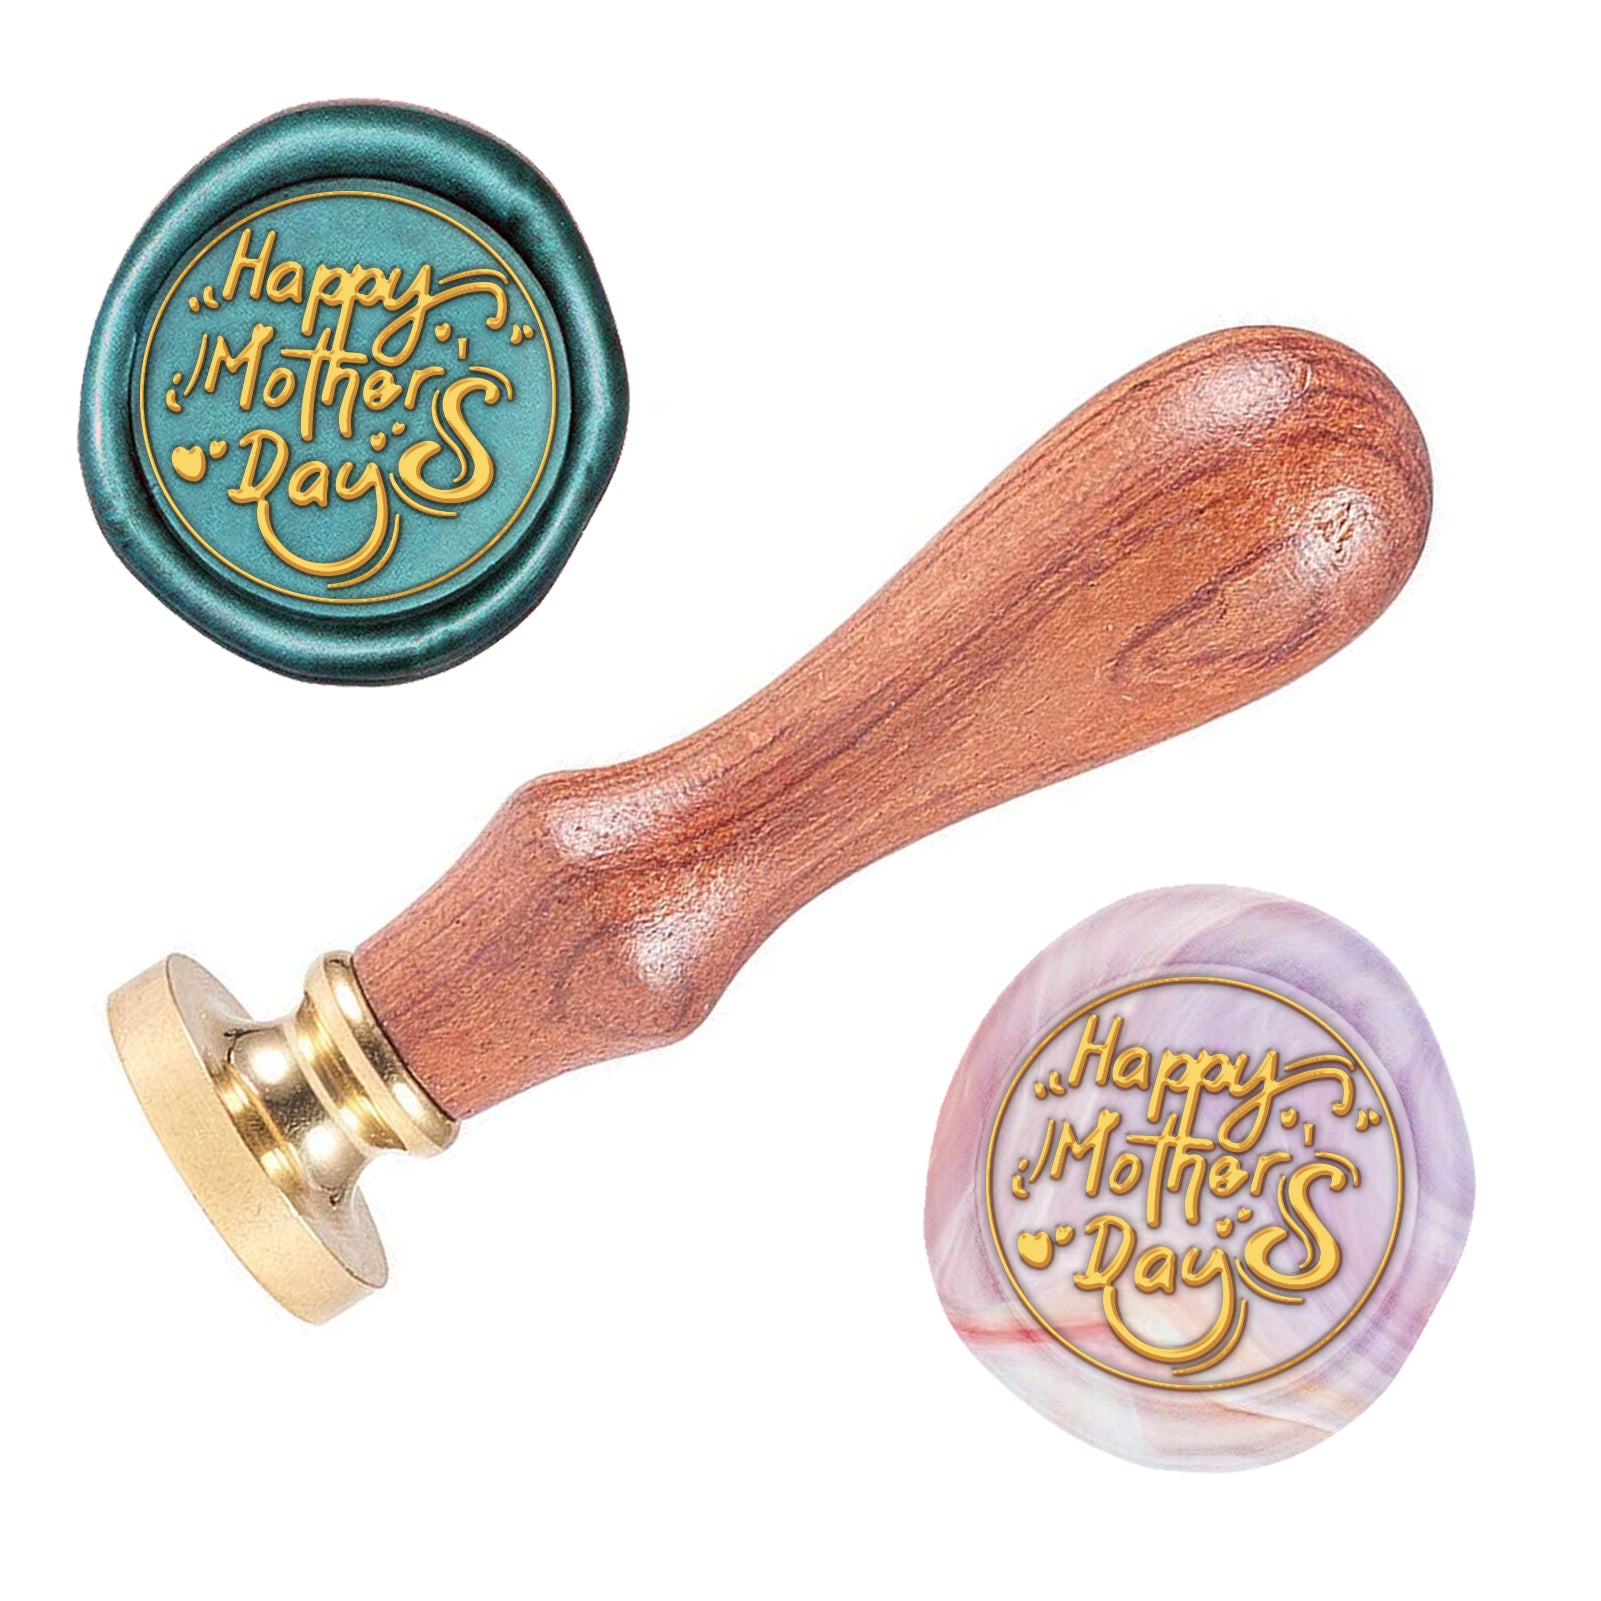 Happy Mothers' Day Wood Handle Wax Seal Stamp